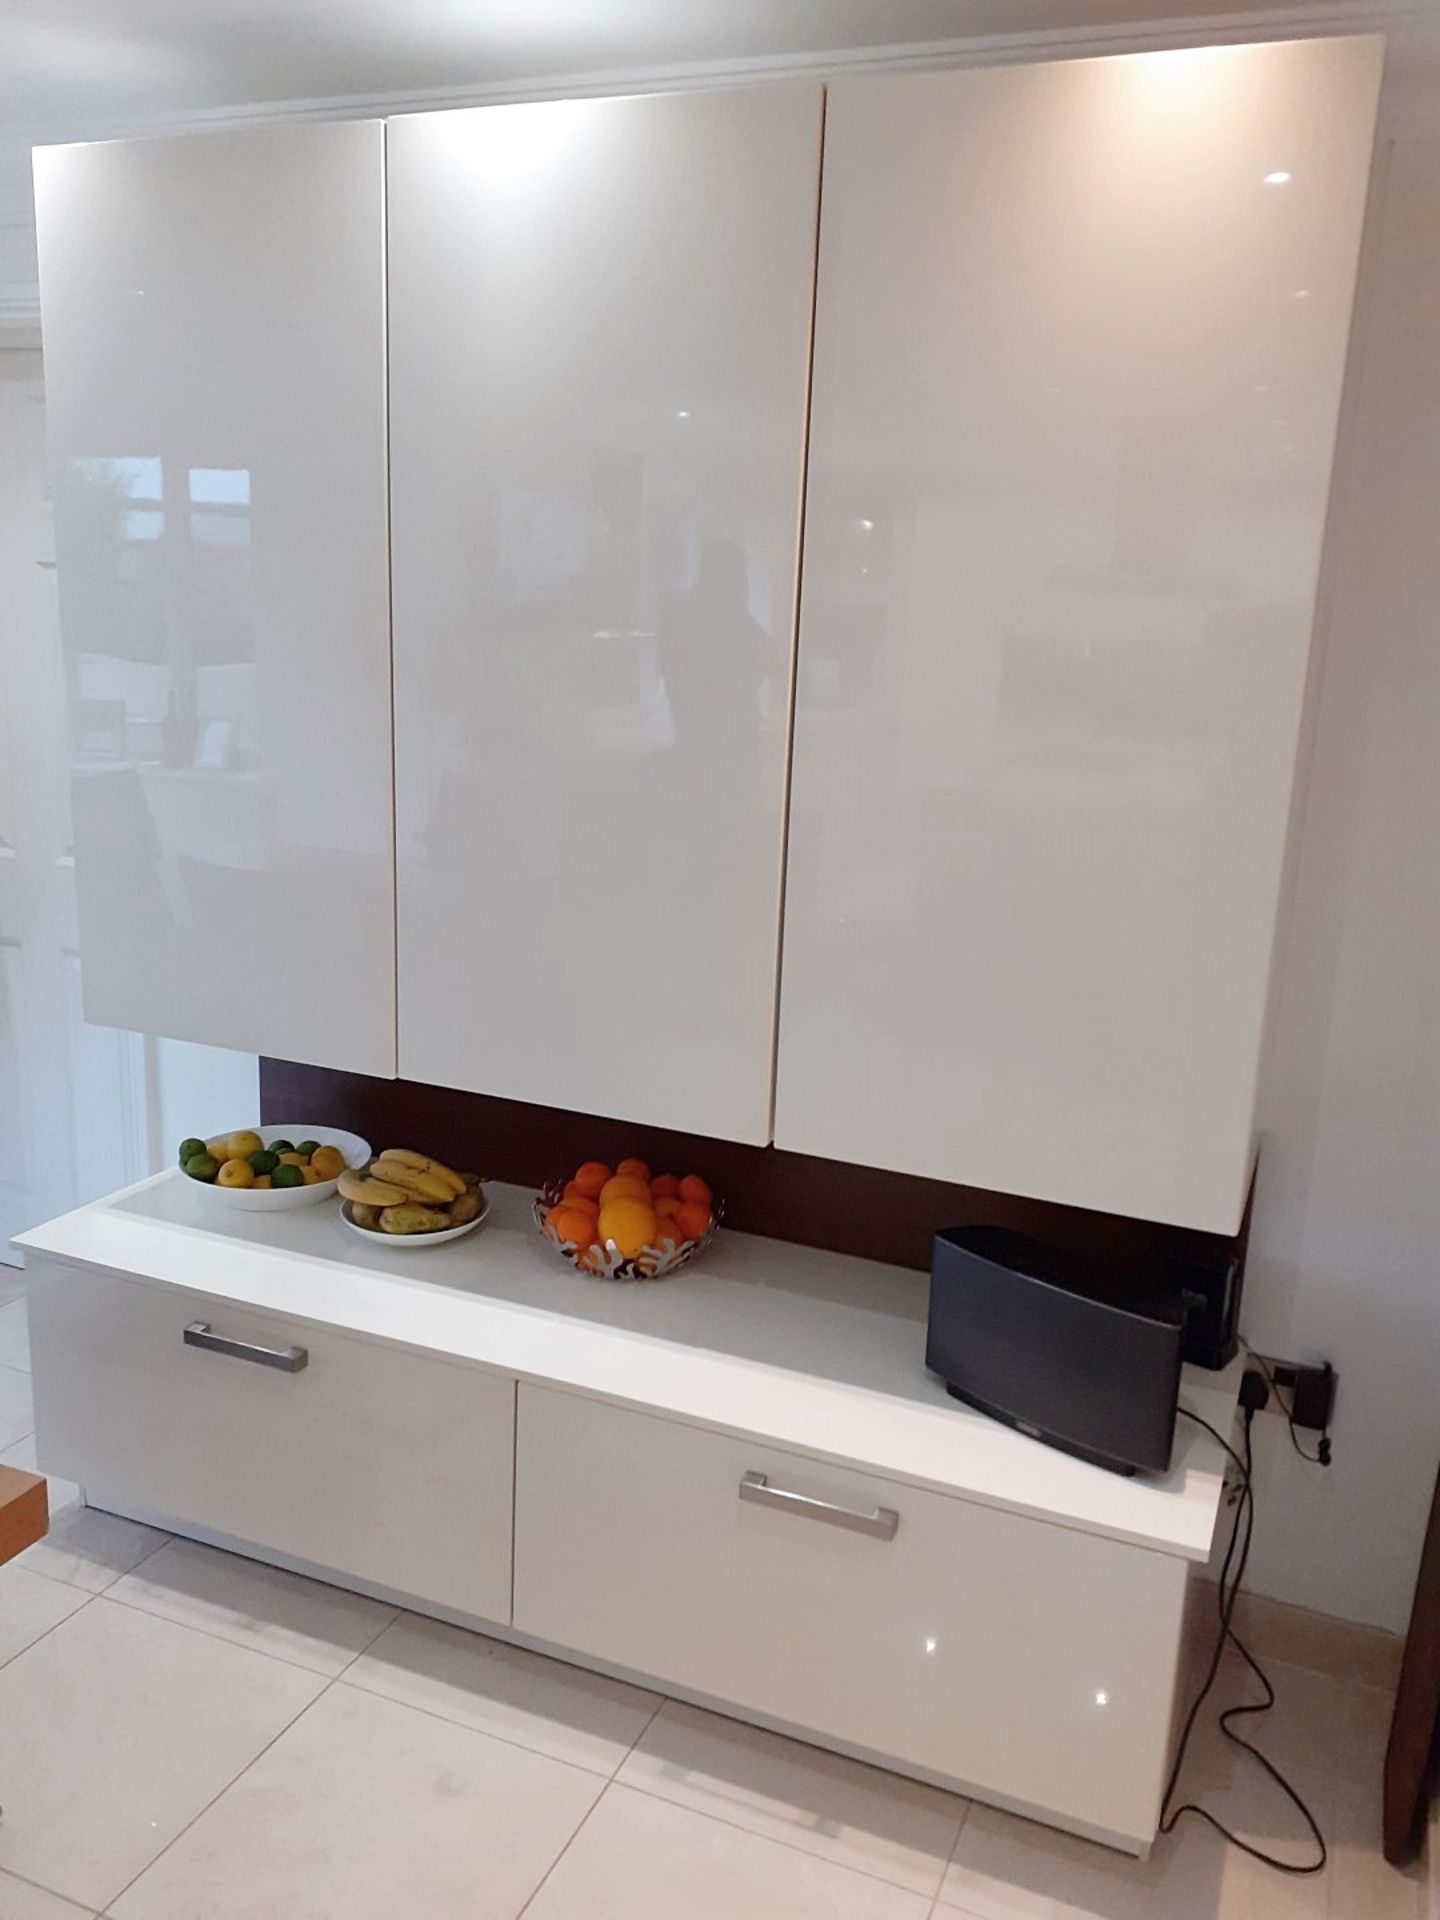 1 x ALNO Fitted Gloss White Kitchen With Integrated Miele Appliances, Silestone Worktops And A - Image 18 of 86